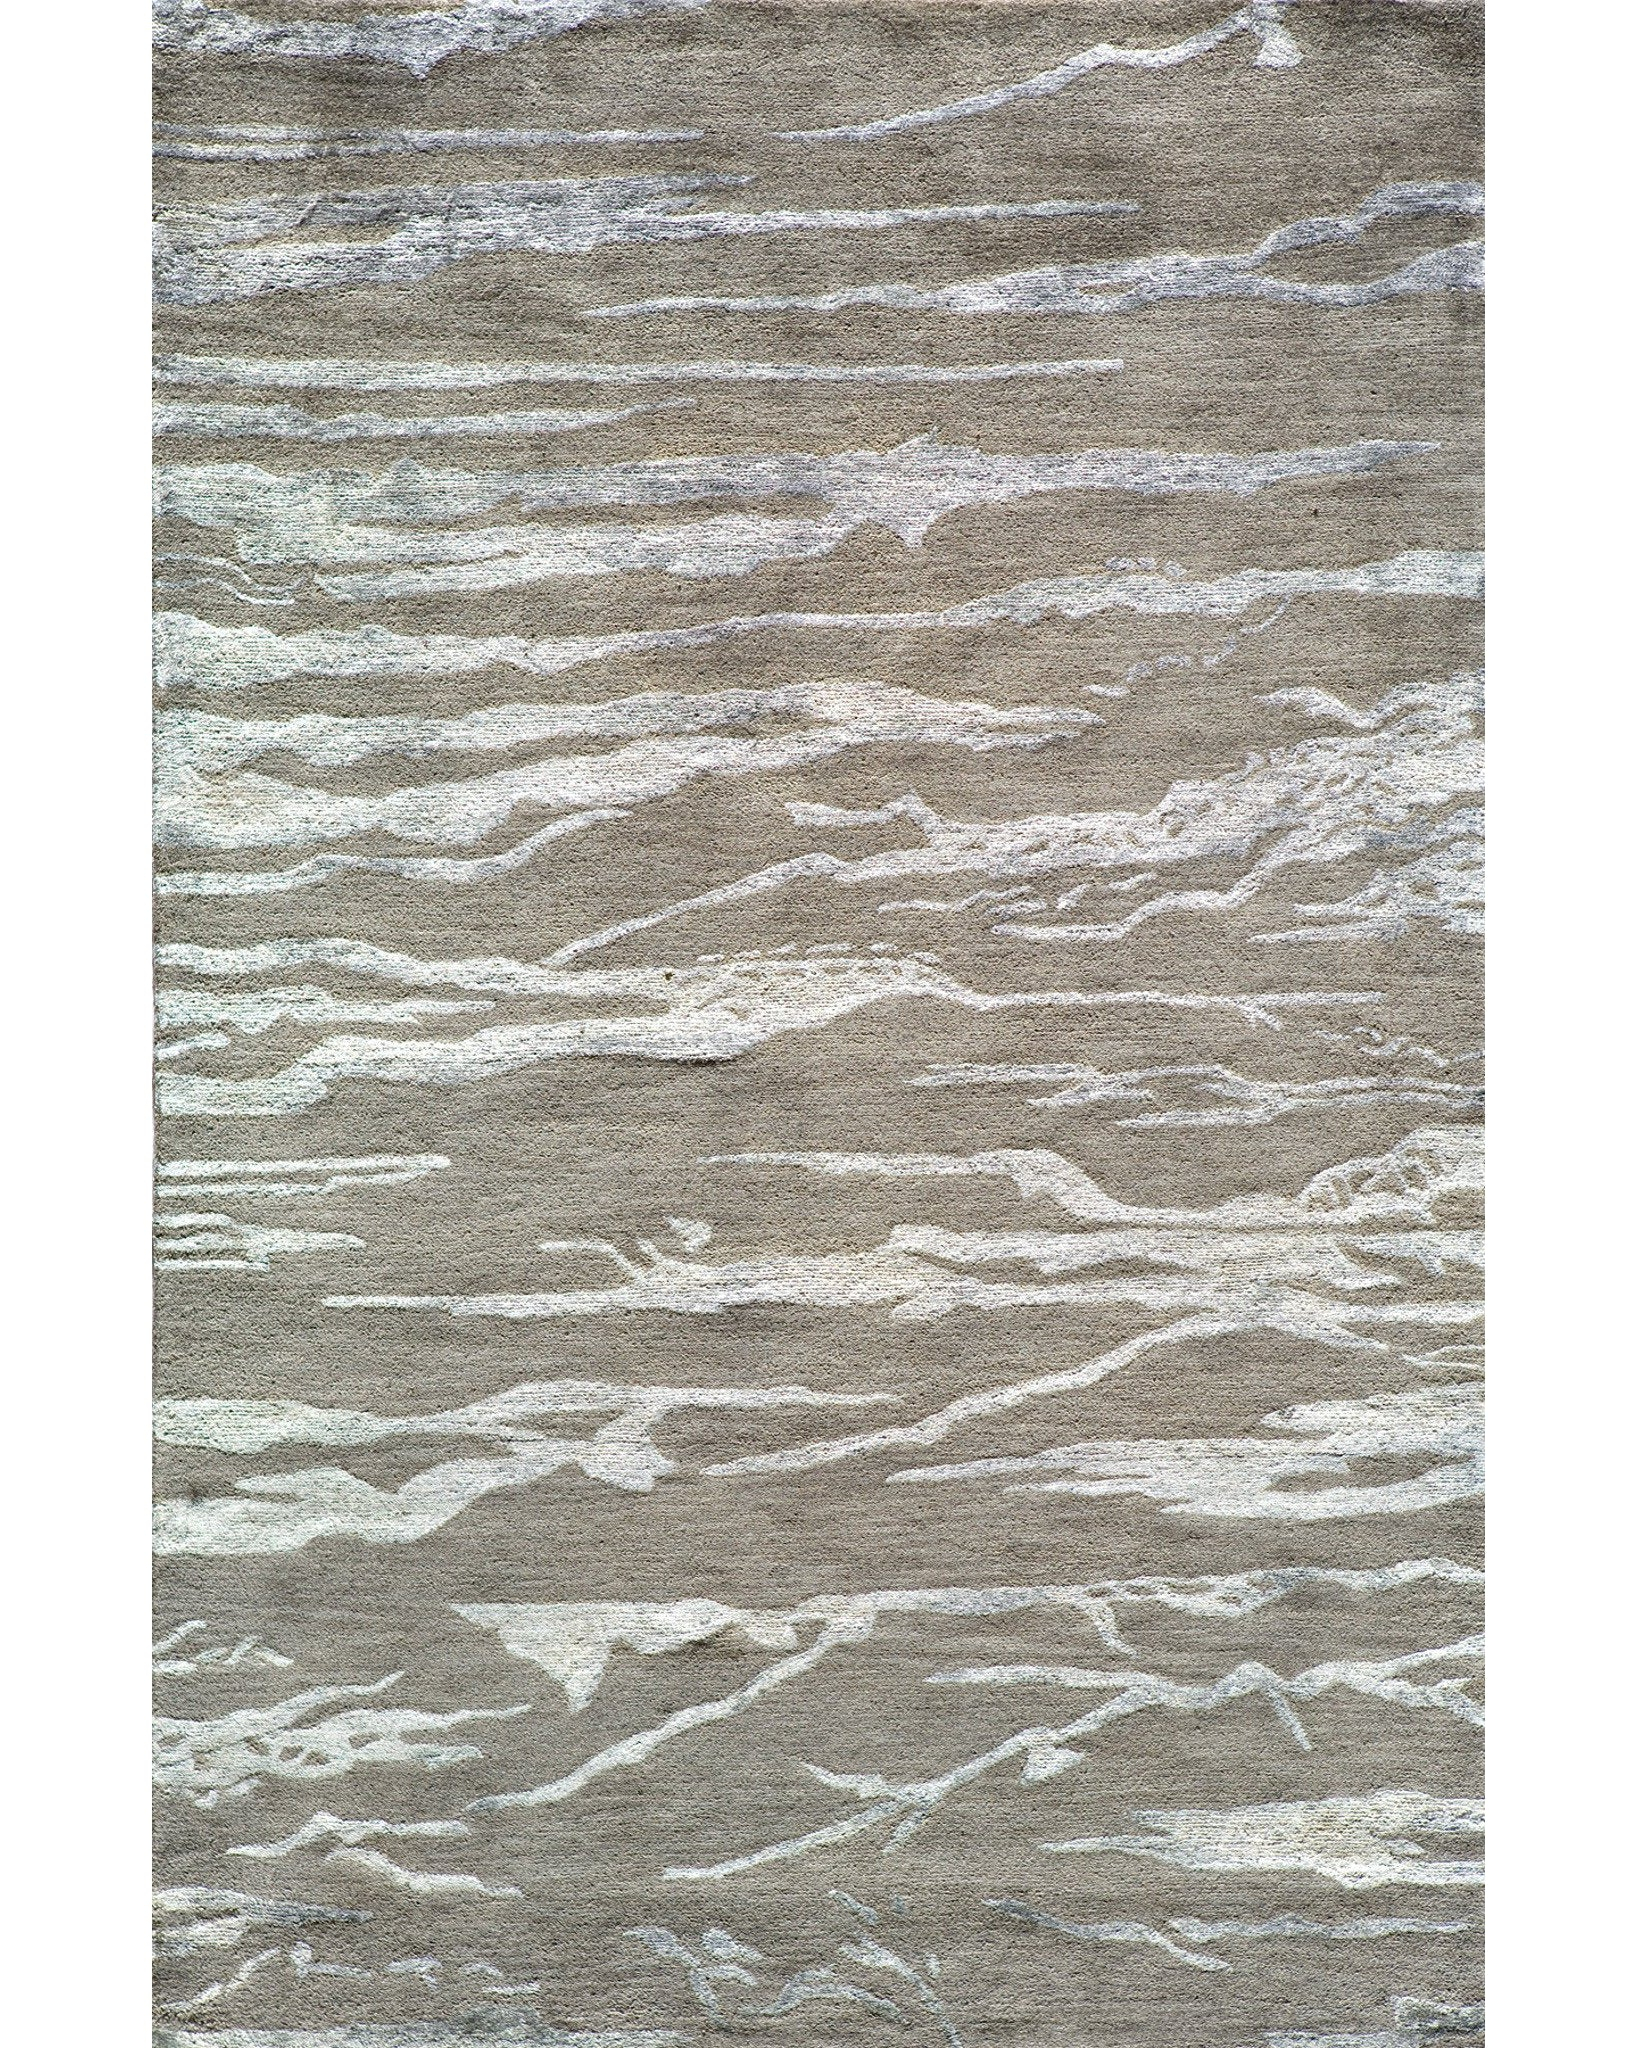 Area rug for living space and any room. Floor decor, rugs and carpets from Tabrizi Rugs. Zen ZEN-02 - 5'0